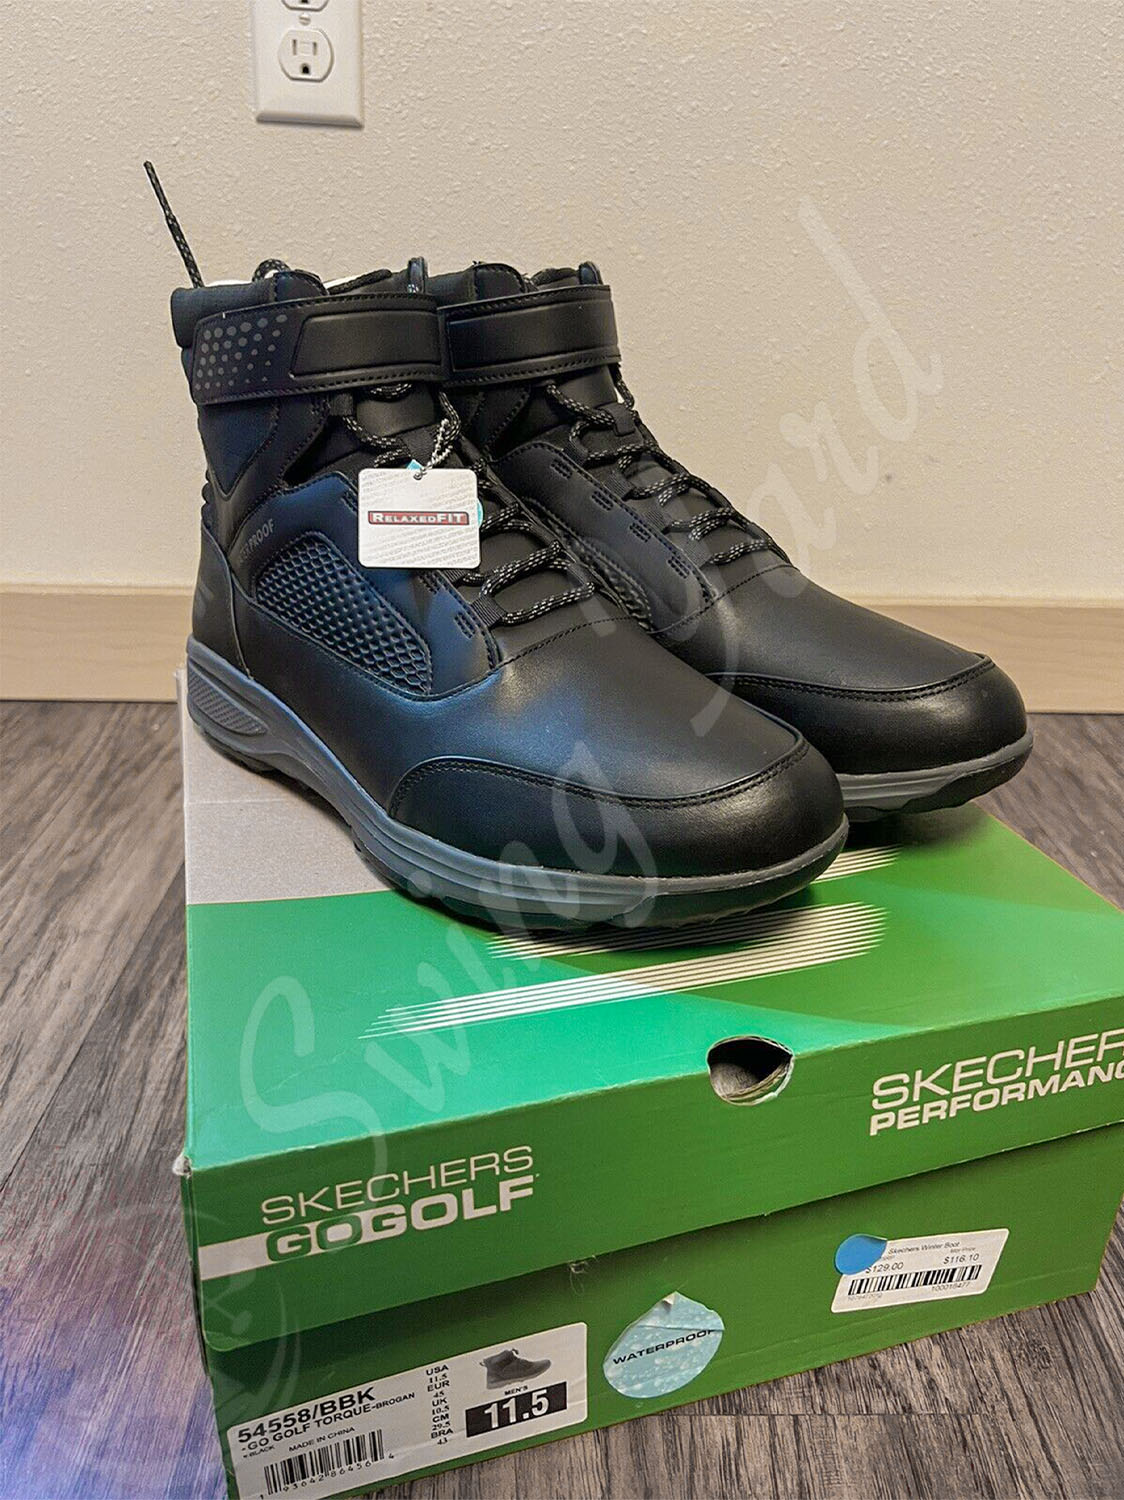 A new Skechers men torque brogan relaxed fit winter golf boots with box at the living room